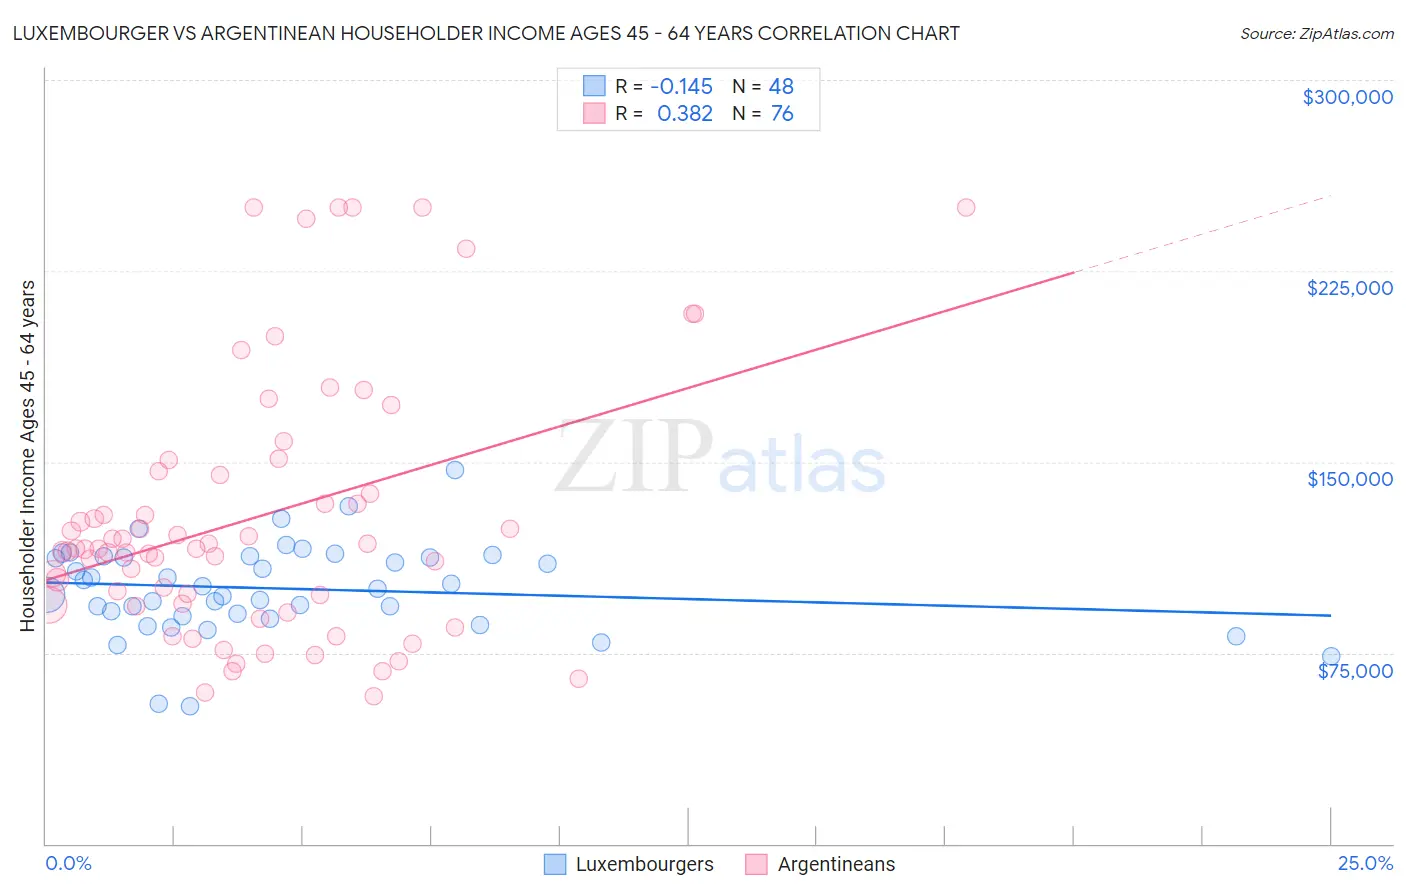 Luxembourger vs Argentinean Householder Income Ages 45 - 64 years